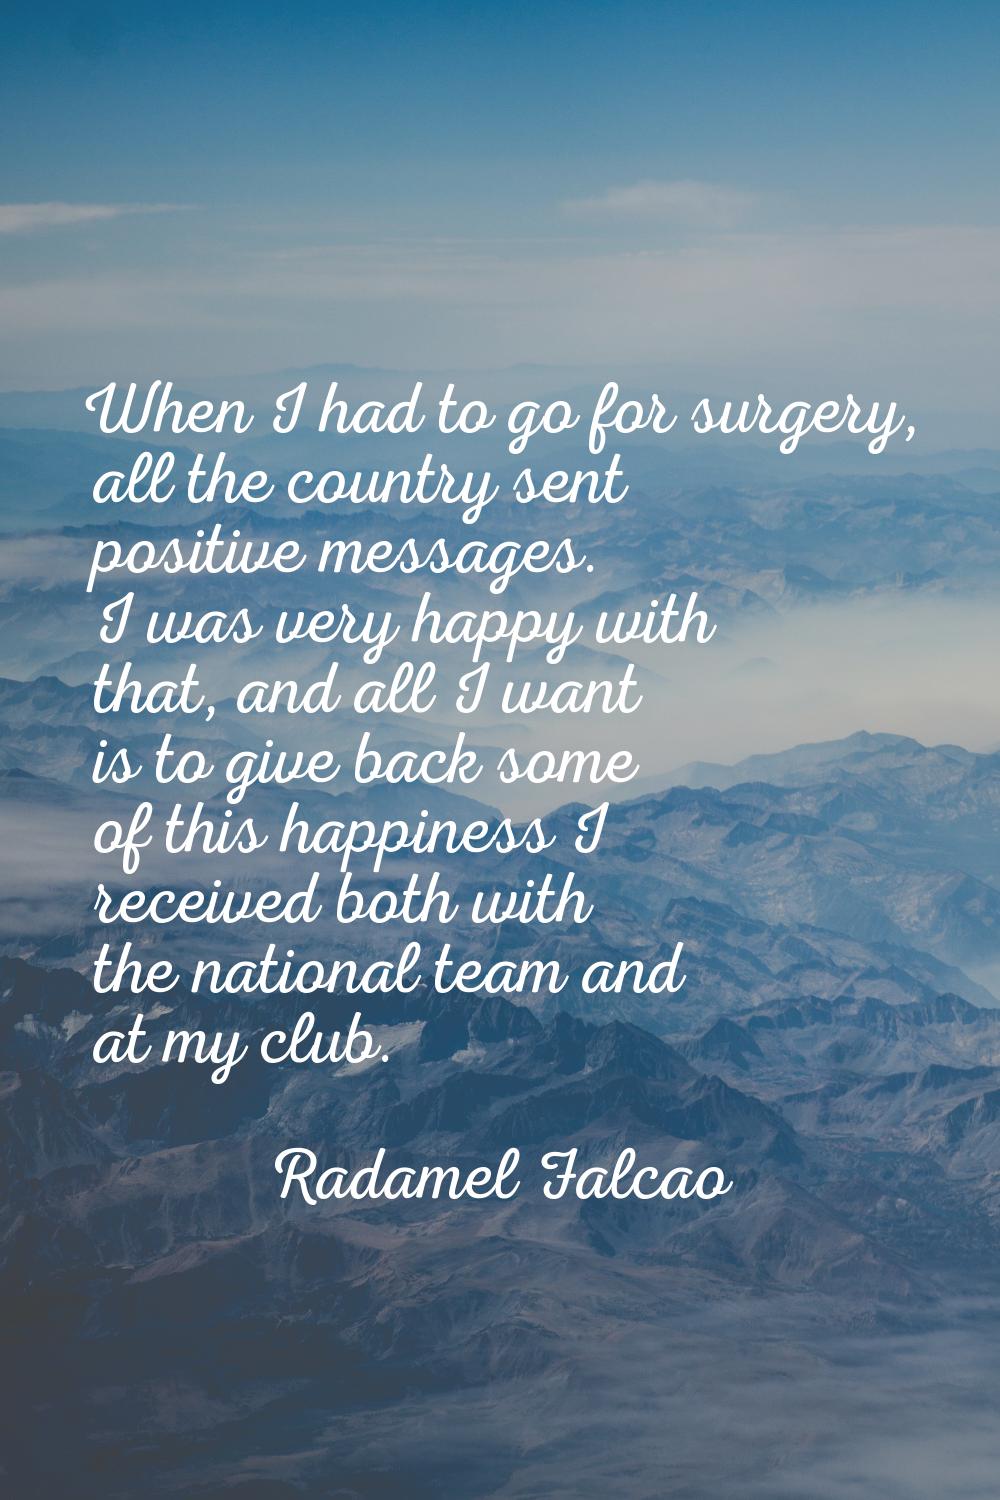 When I had to go for surgery, all the country sent positive messages. I was very happy with that, a